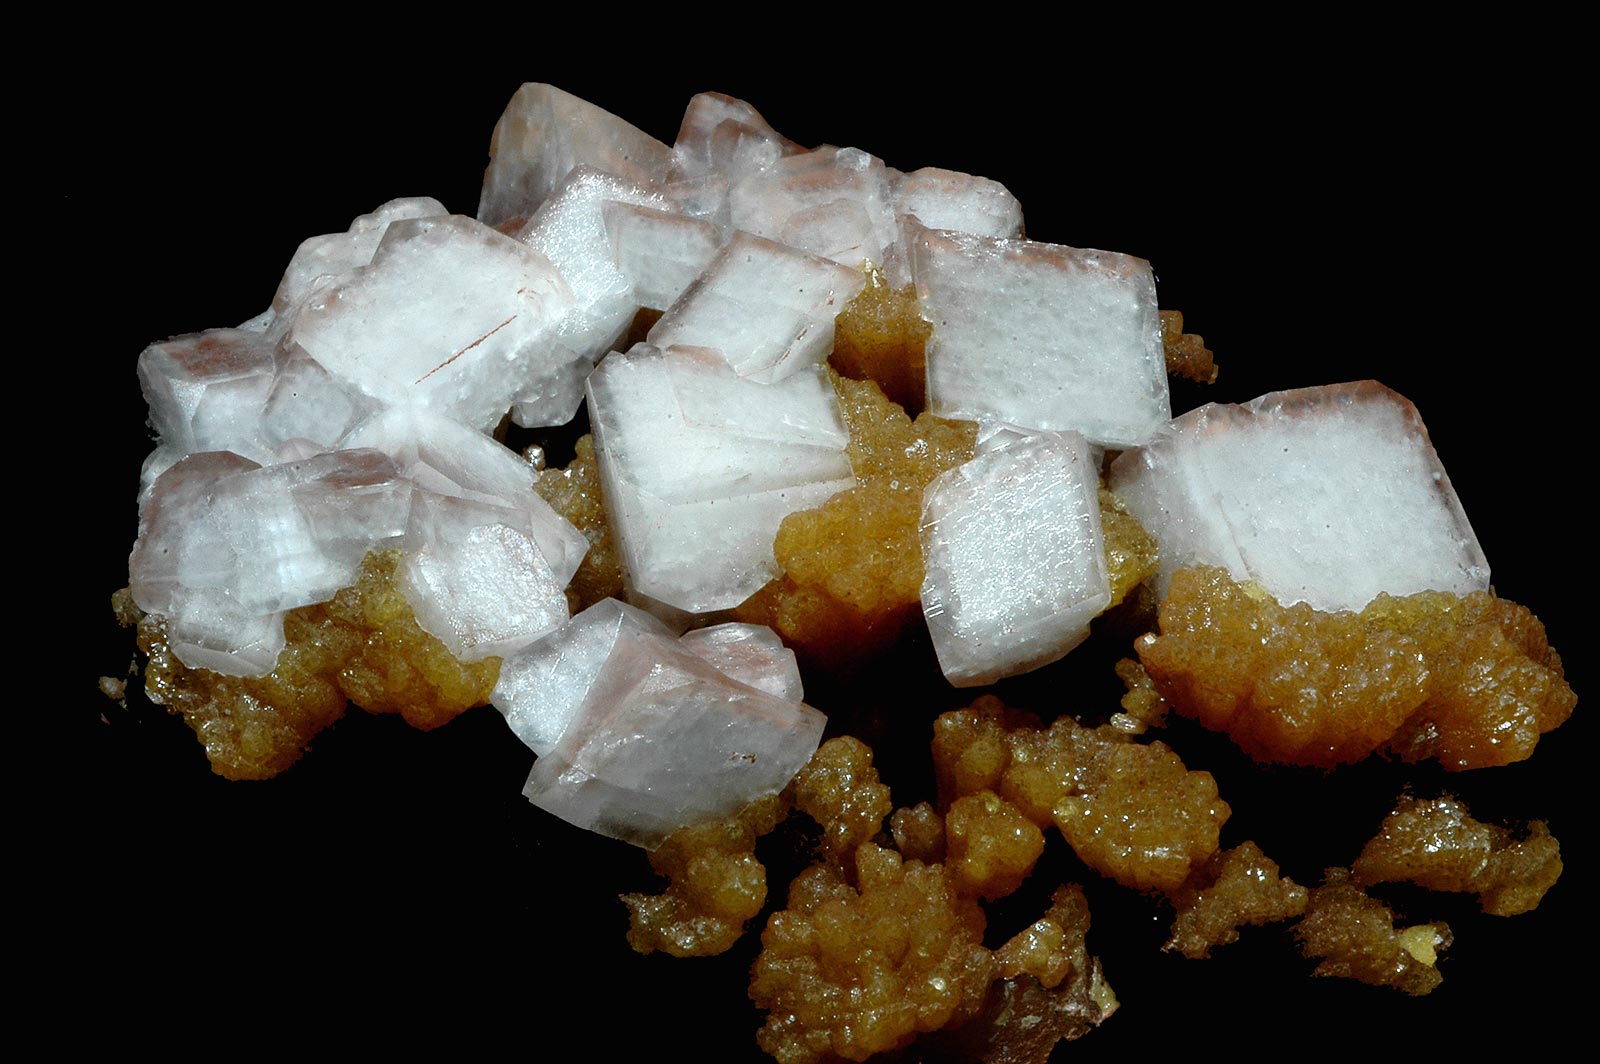 White rhombic crystals of dolomite with yellow crystals of mimetite from Morocco